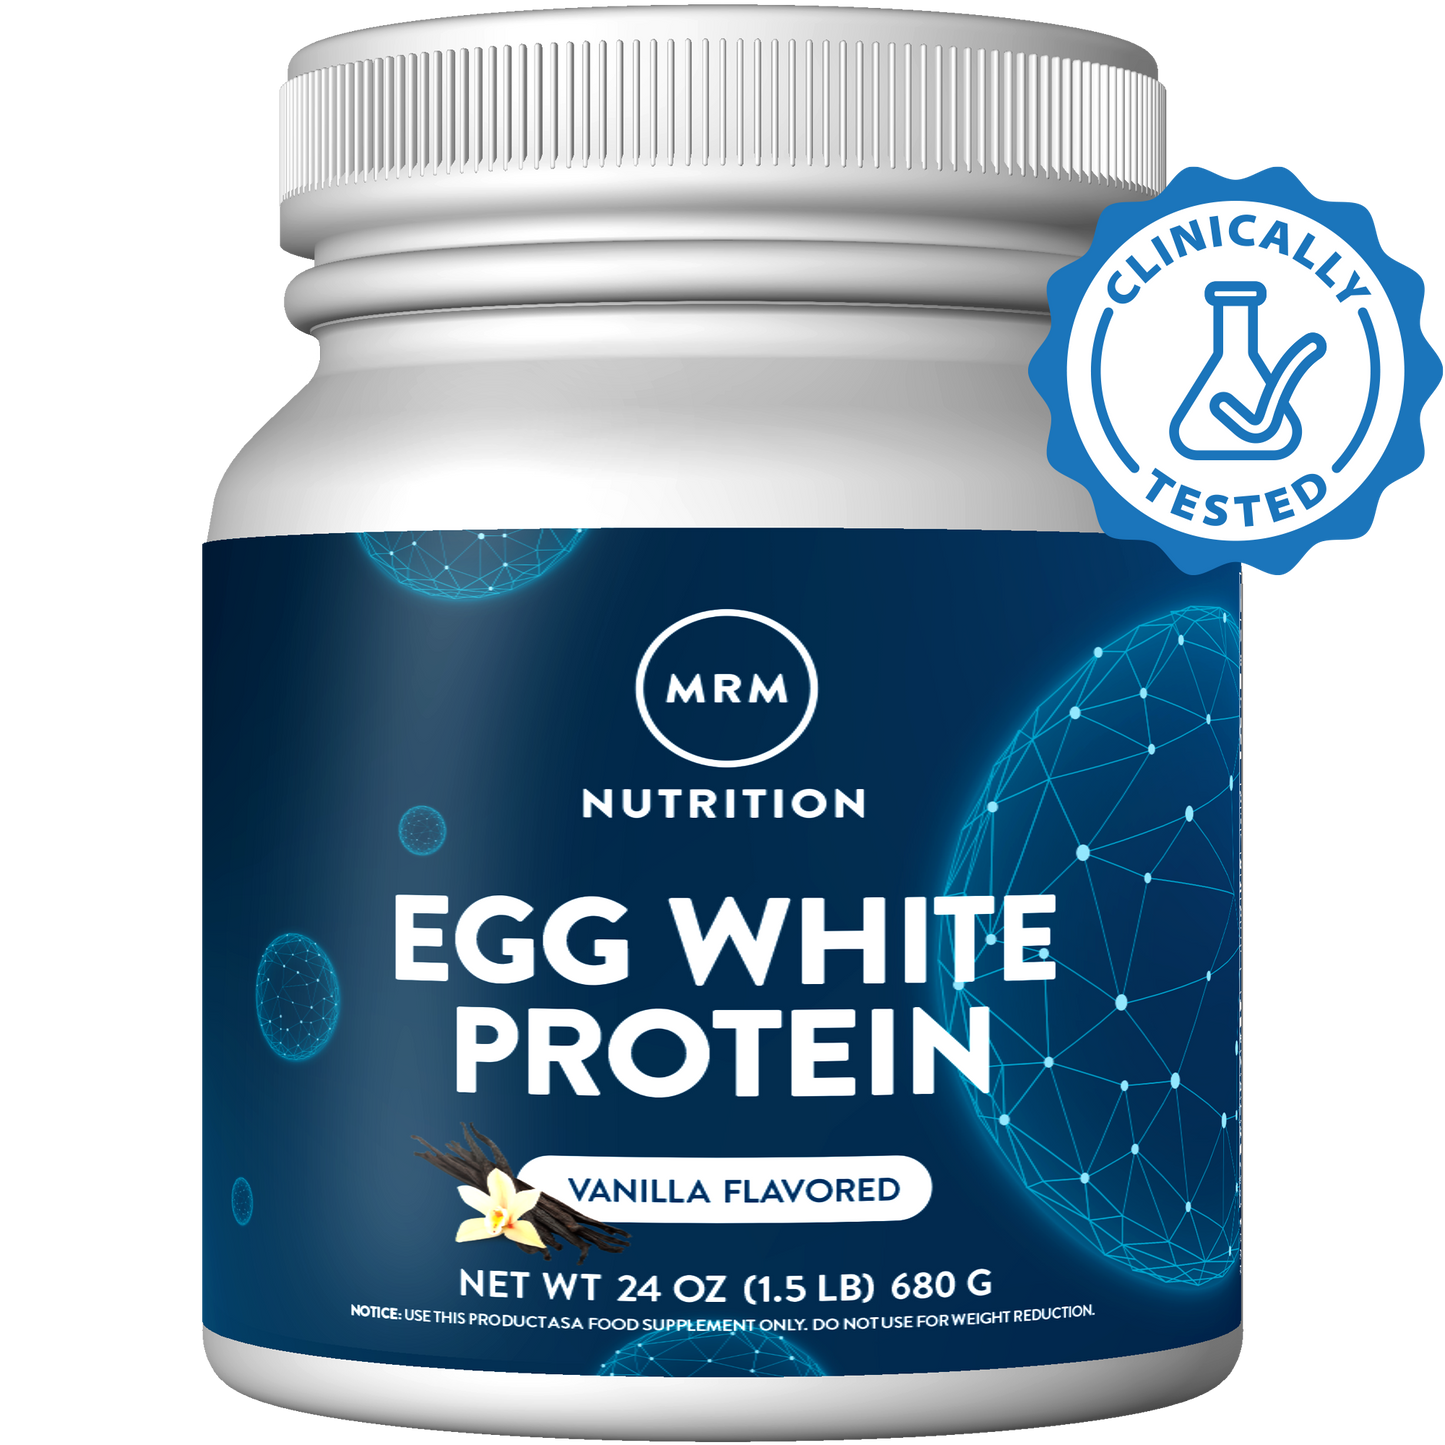 Egg White Protein Chocolate Flavored (12oz)